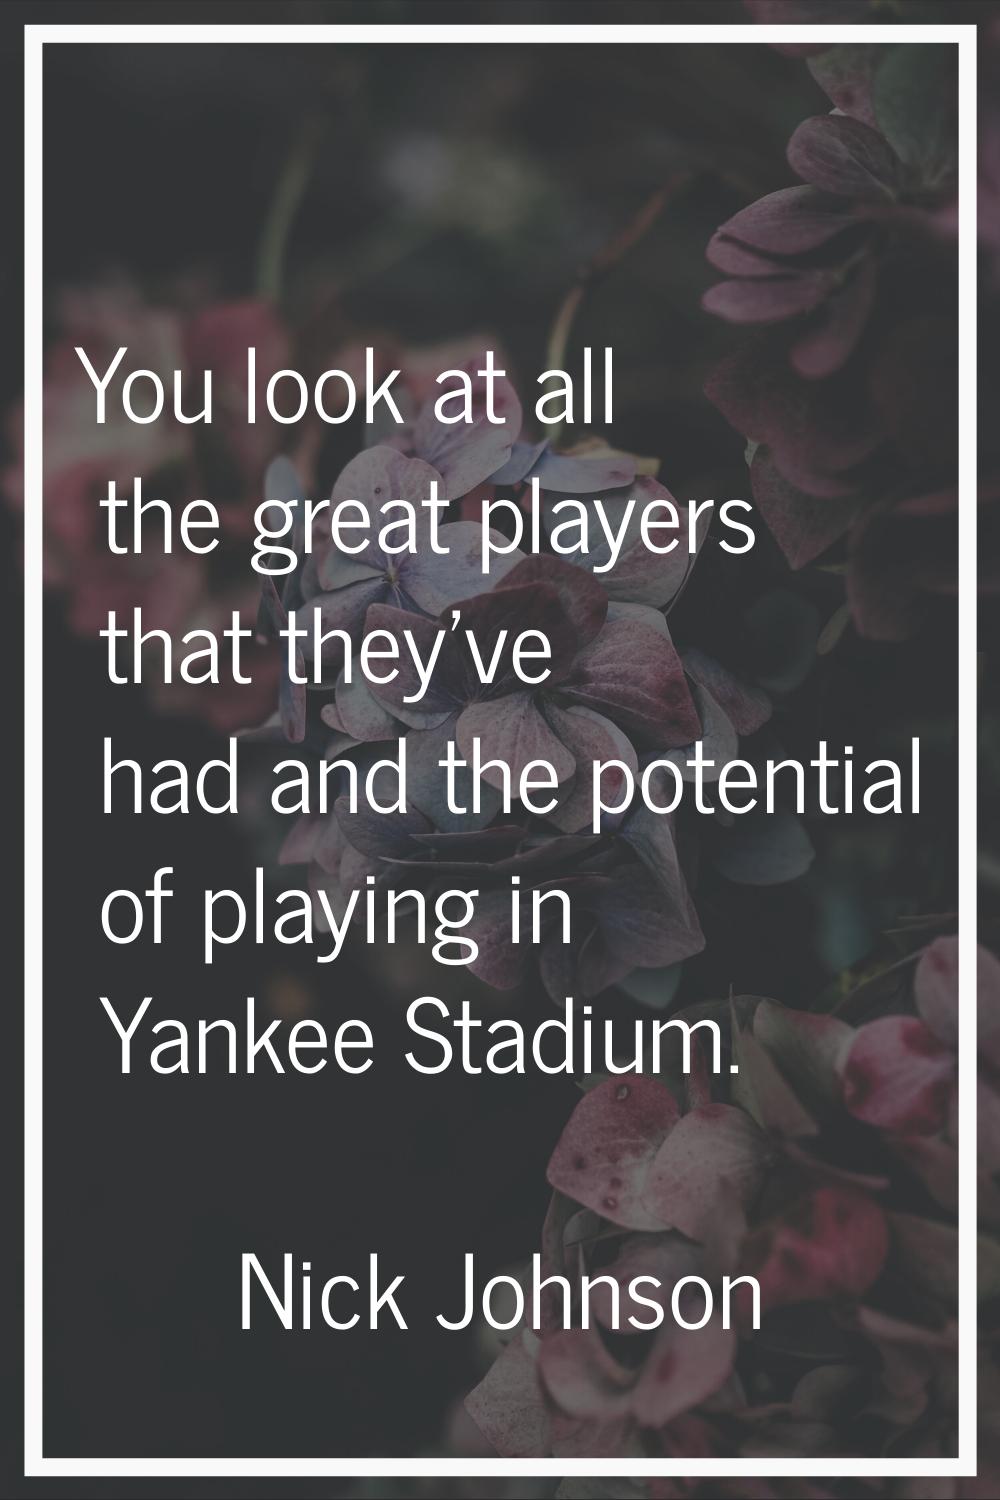 You look at all the great players that they've had and the potential of playing in Yankee Stadium.